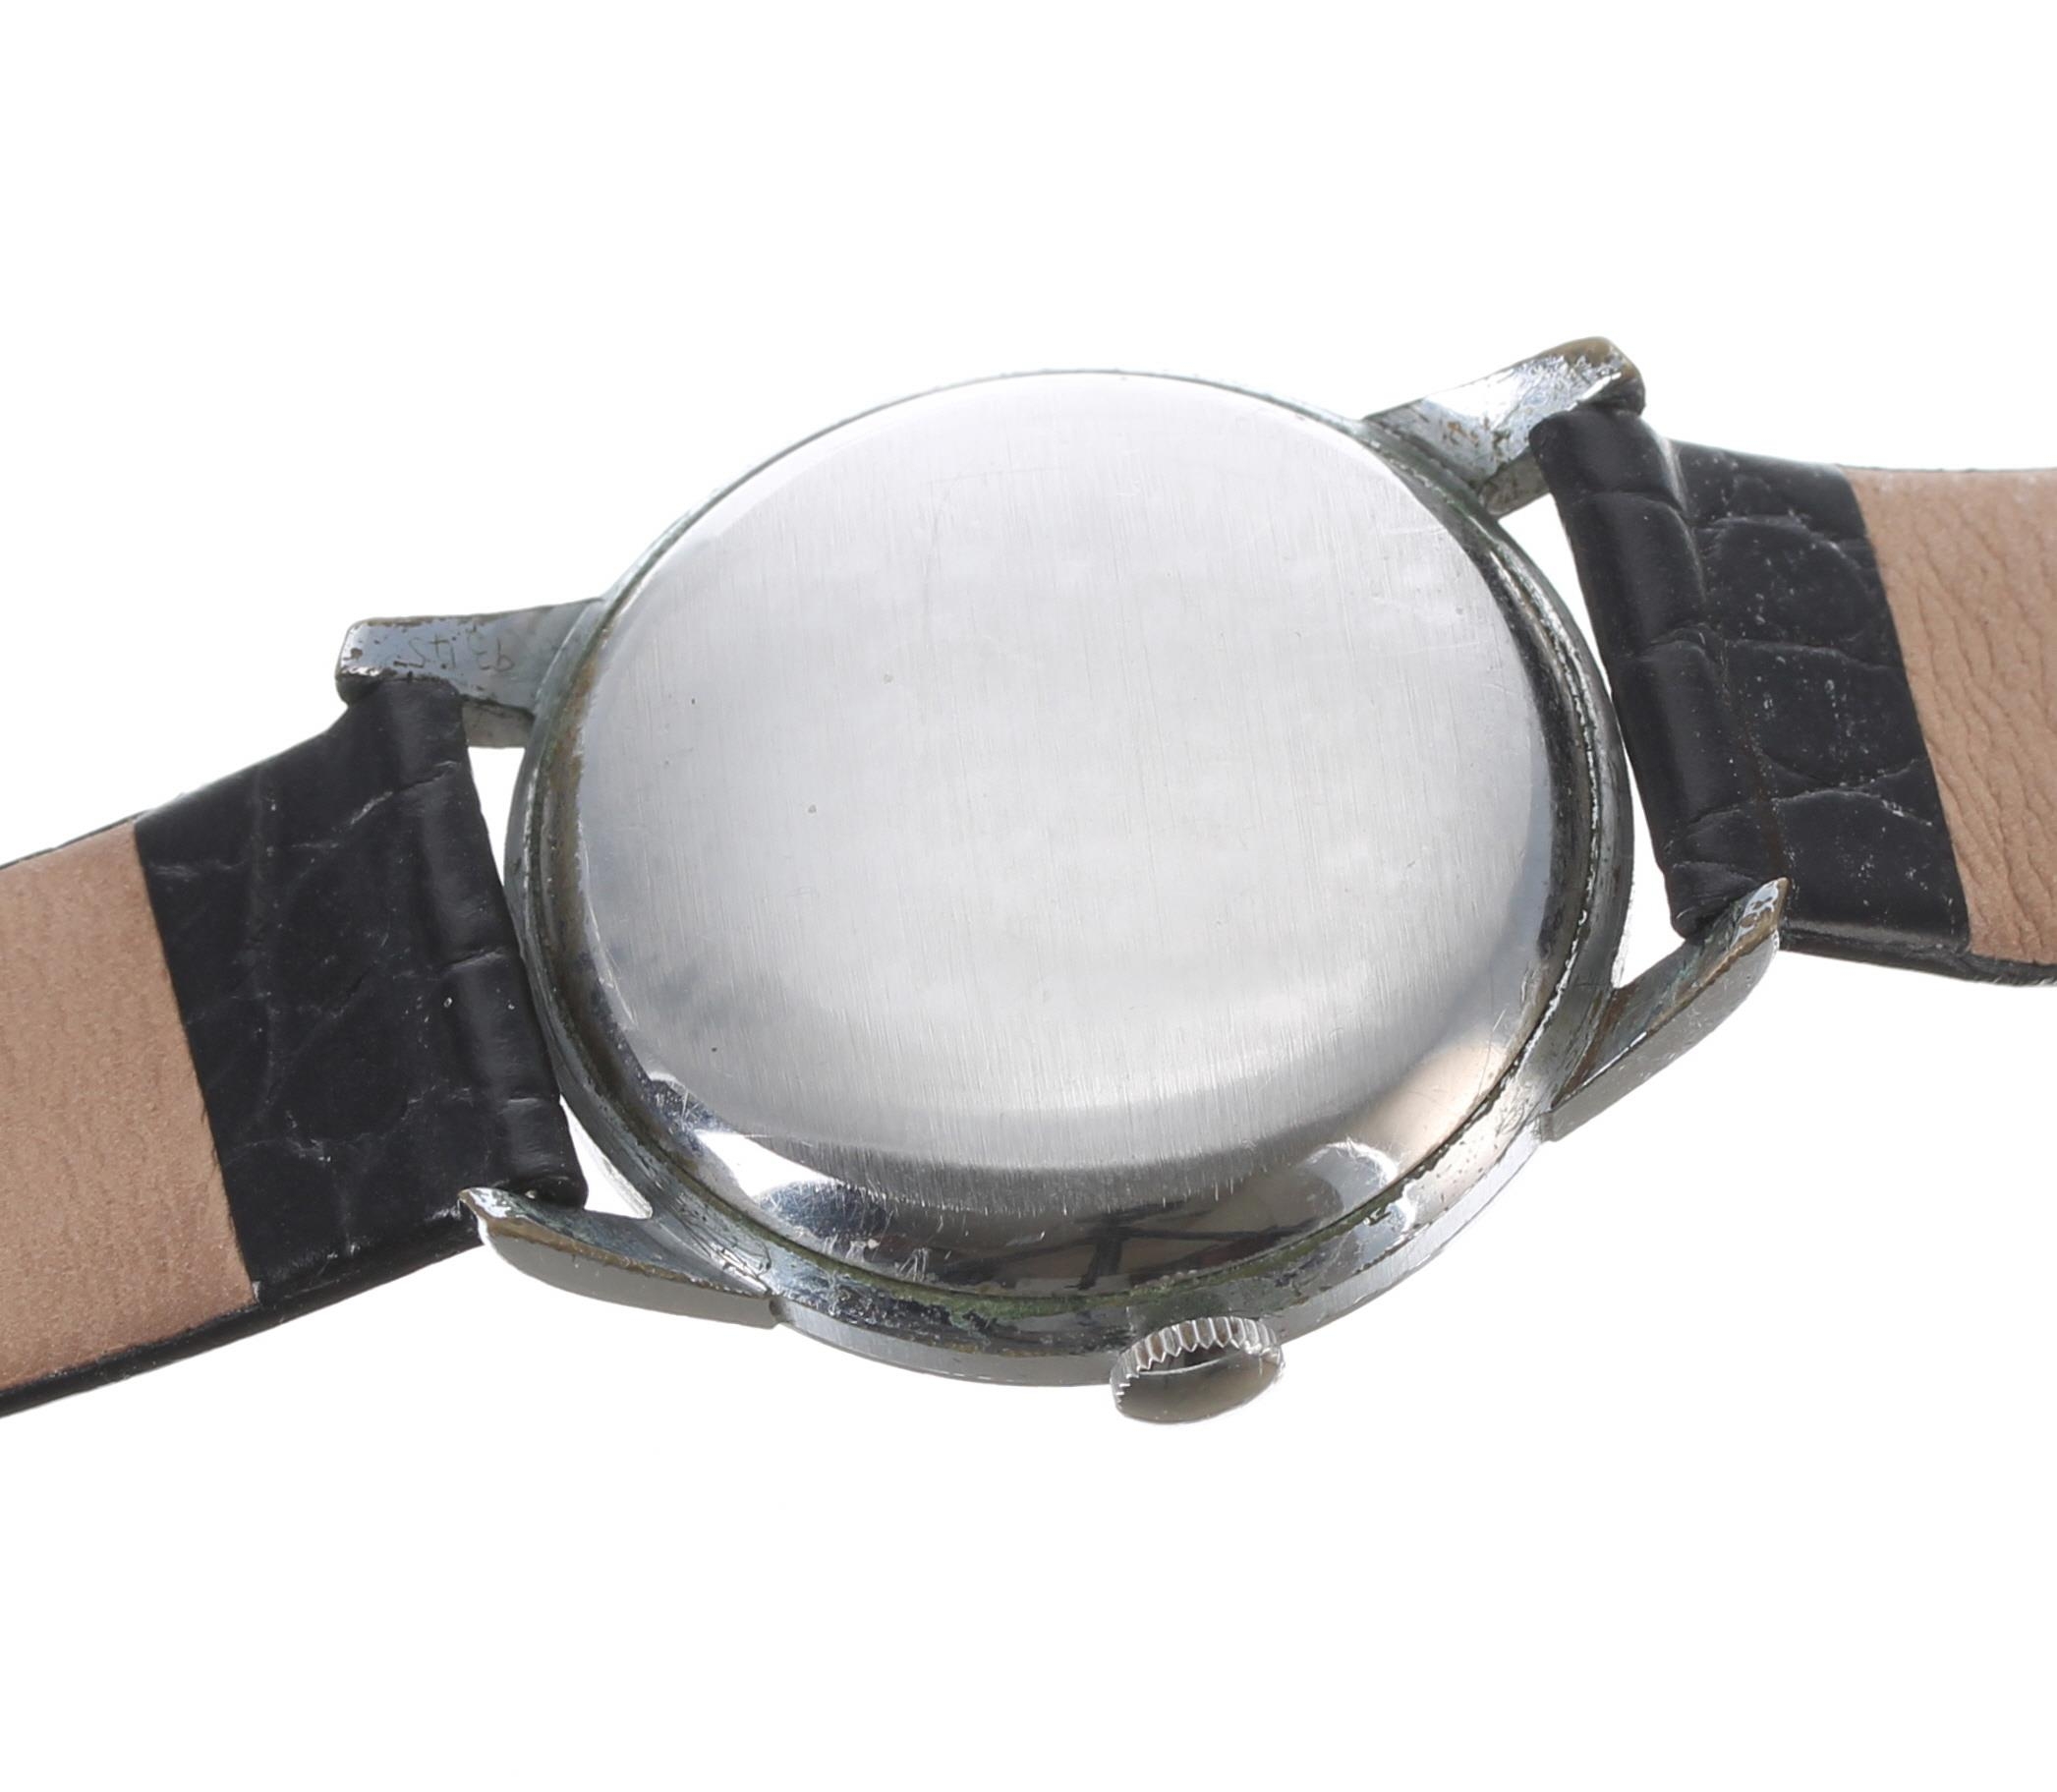 Cyma Cymaflex automatic stainless steel gentleman's wristwatch, ref. 11218.6 899, signed silvered - Image 2 of 3